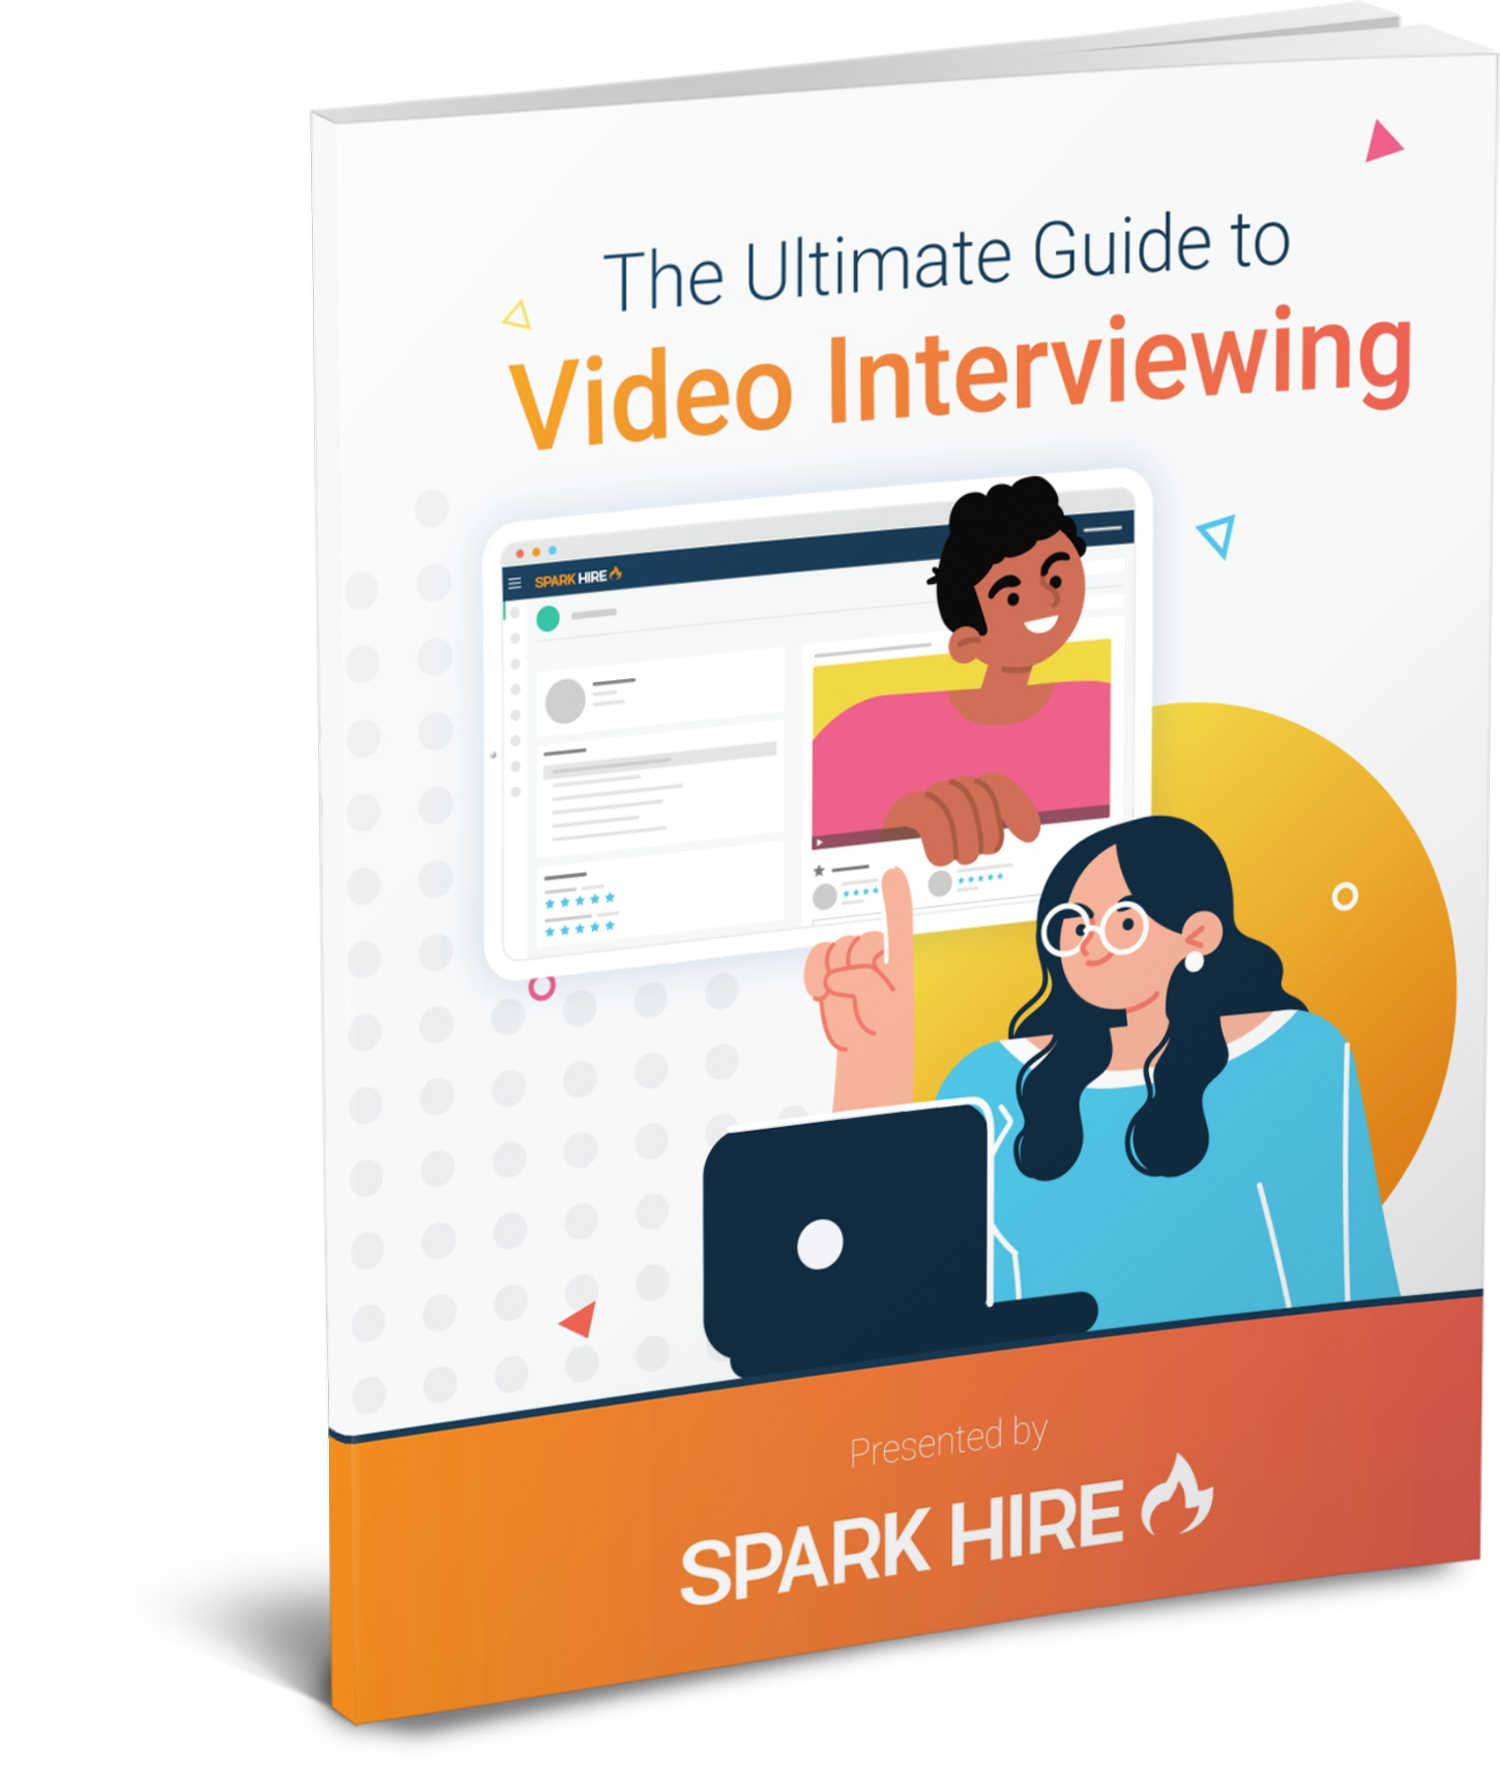 The Ultimate Guide to Video Interviewing eBook Cover